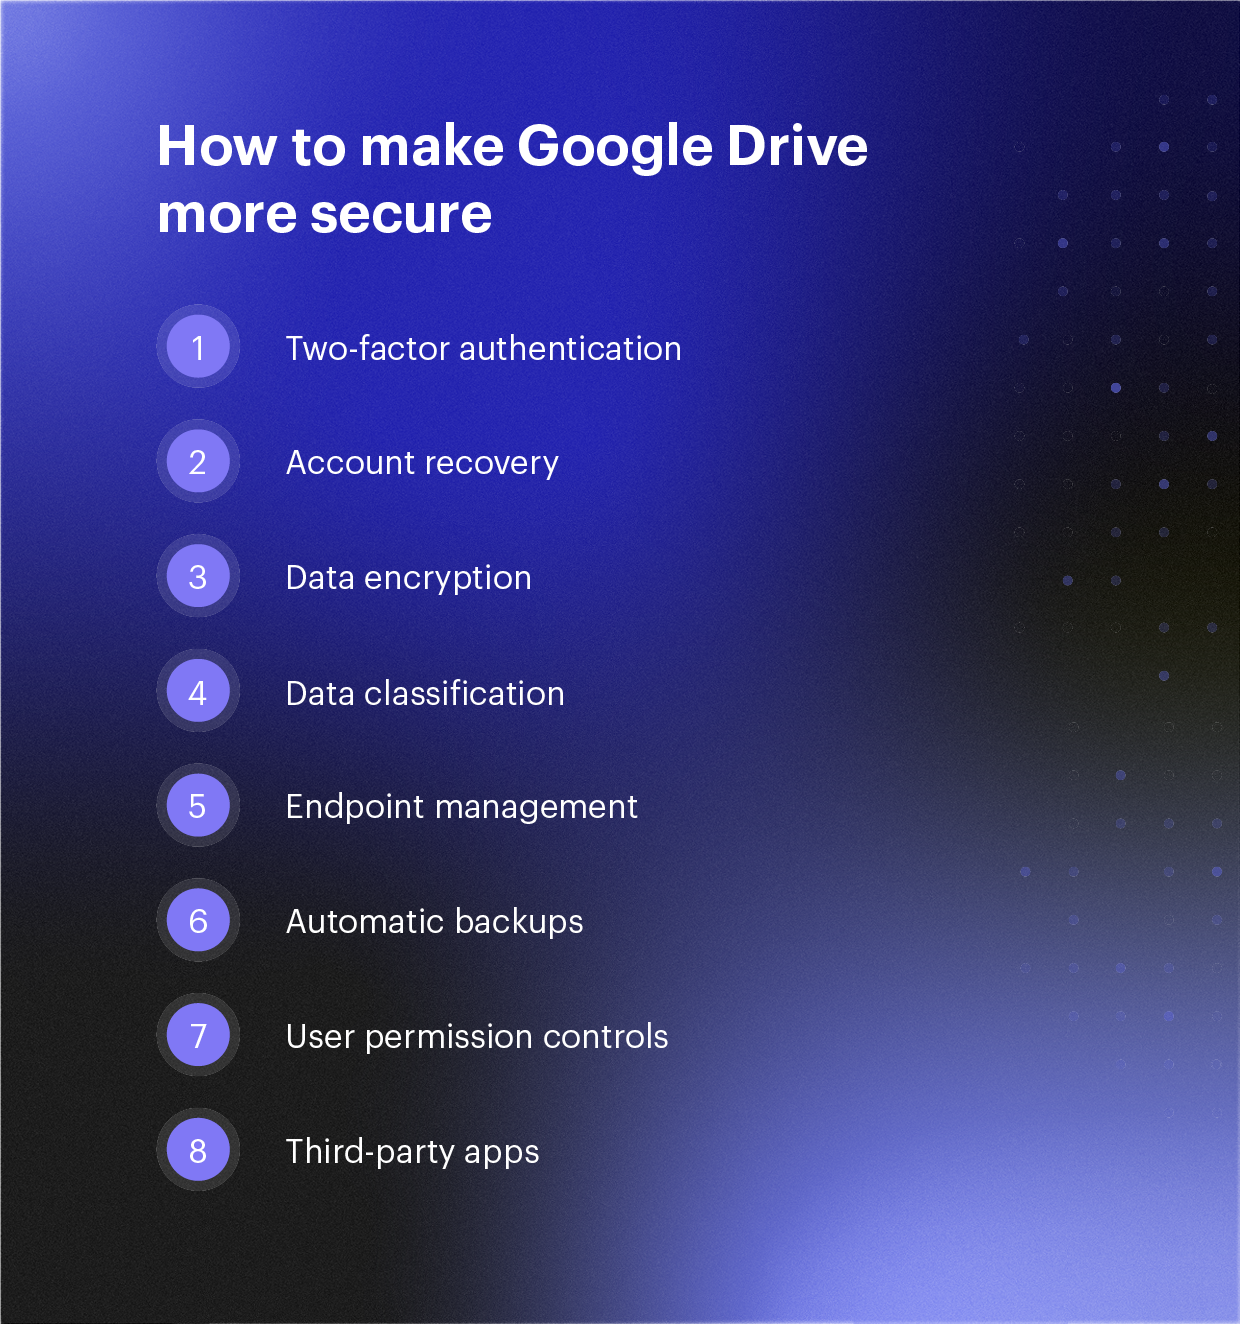 Is Google Drive Secure? How to Protect Your Files